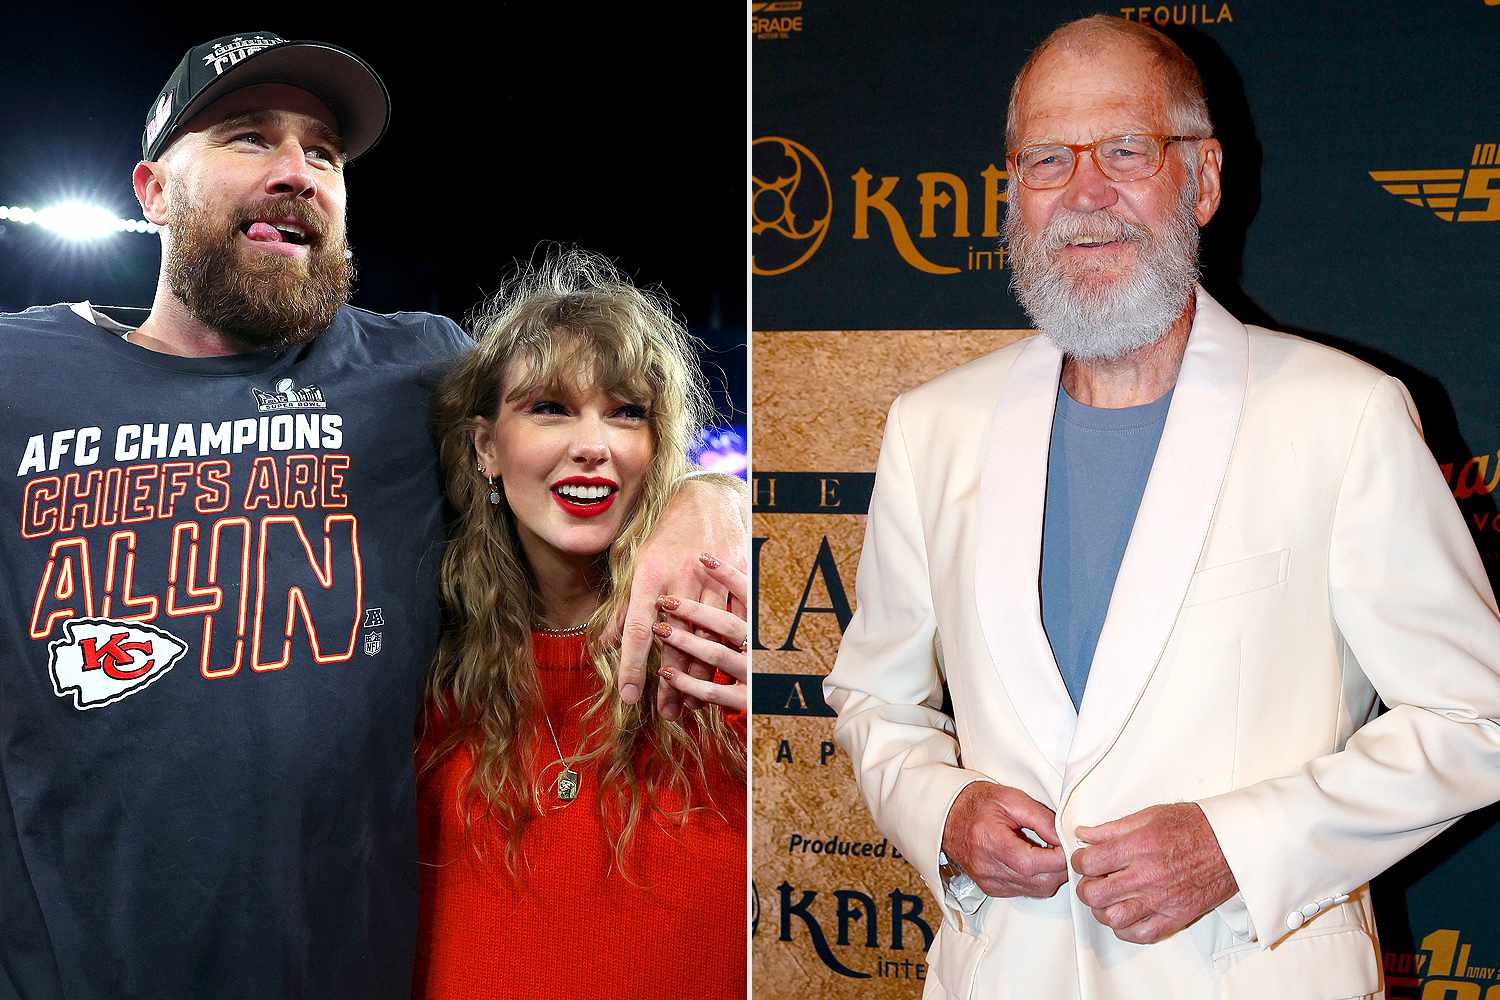 What Good For The Goose Also Good For The Gander: David Letterman defends Taylor Swift From Her NFL Detractors, Saying, "It's Something Positive And Happy For The World, And it's Good For The Footballers."